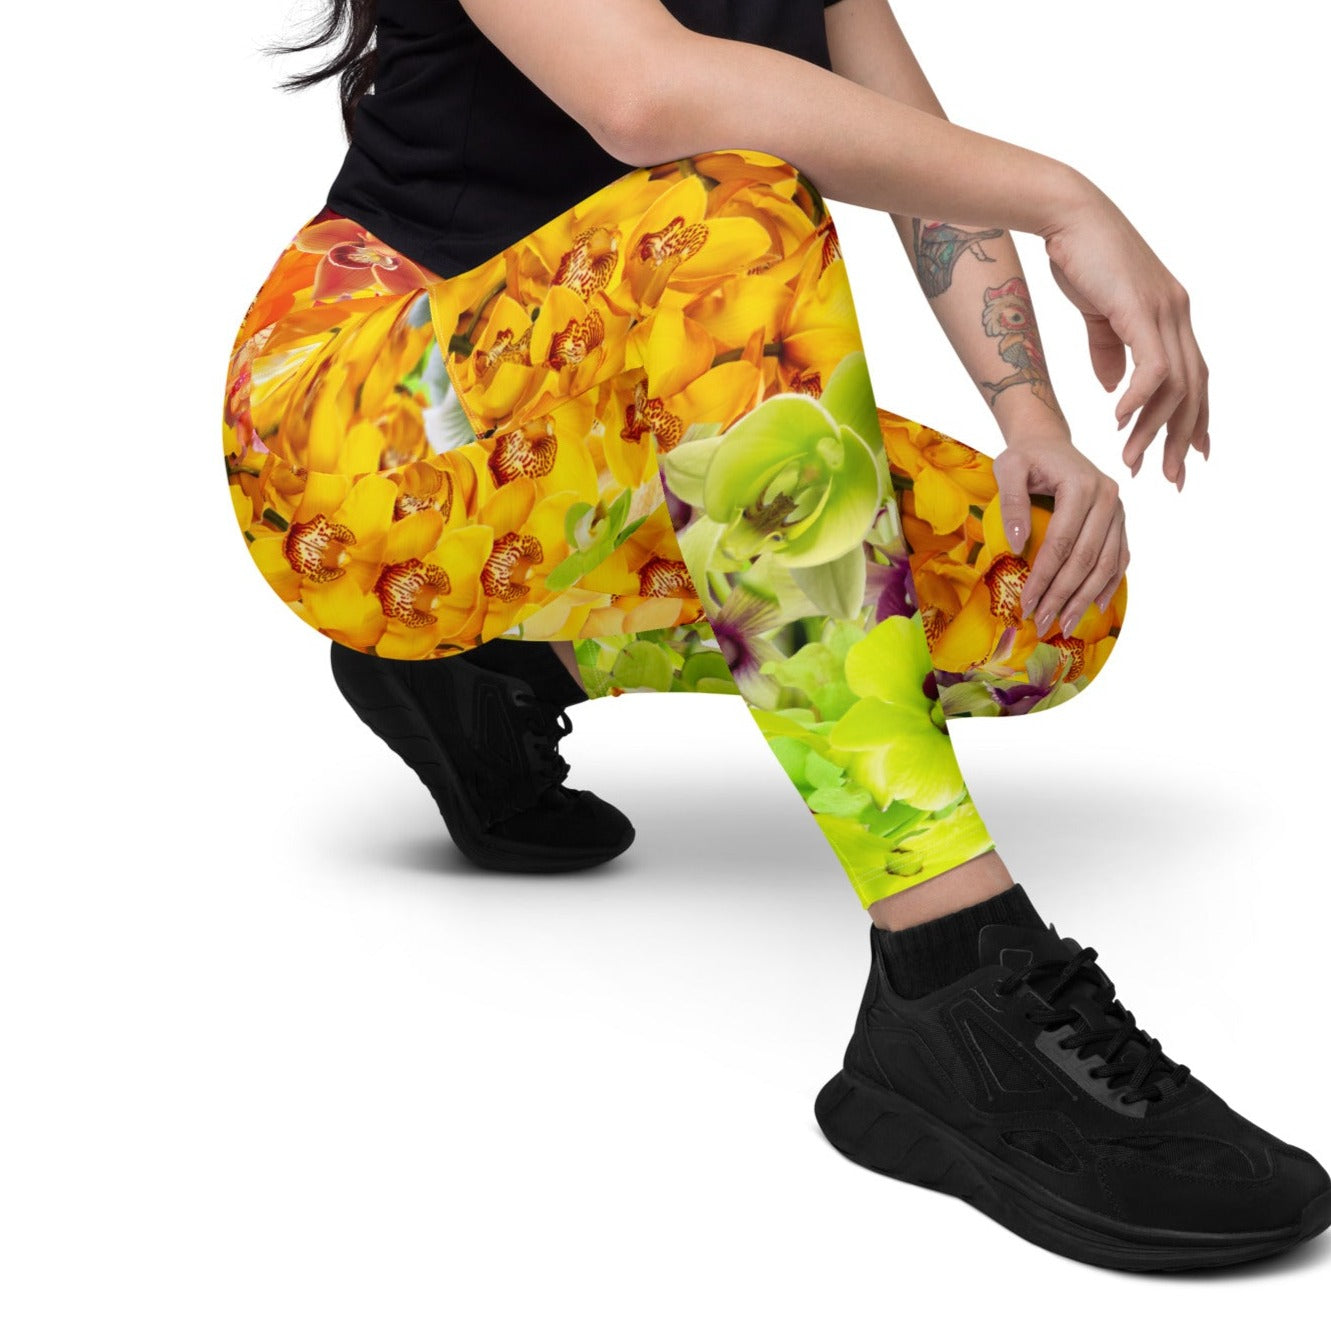 MONARCH Leggings with pockets